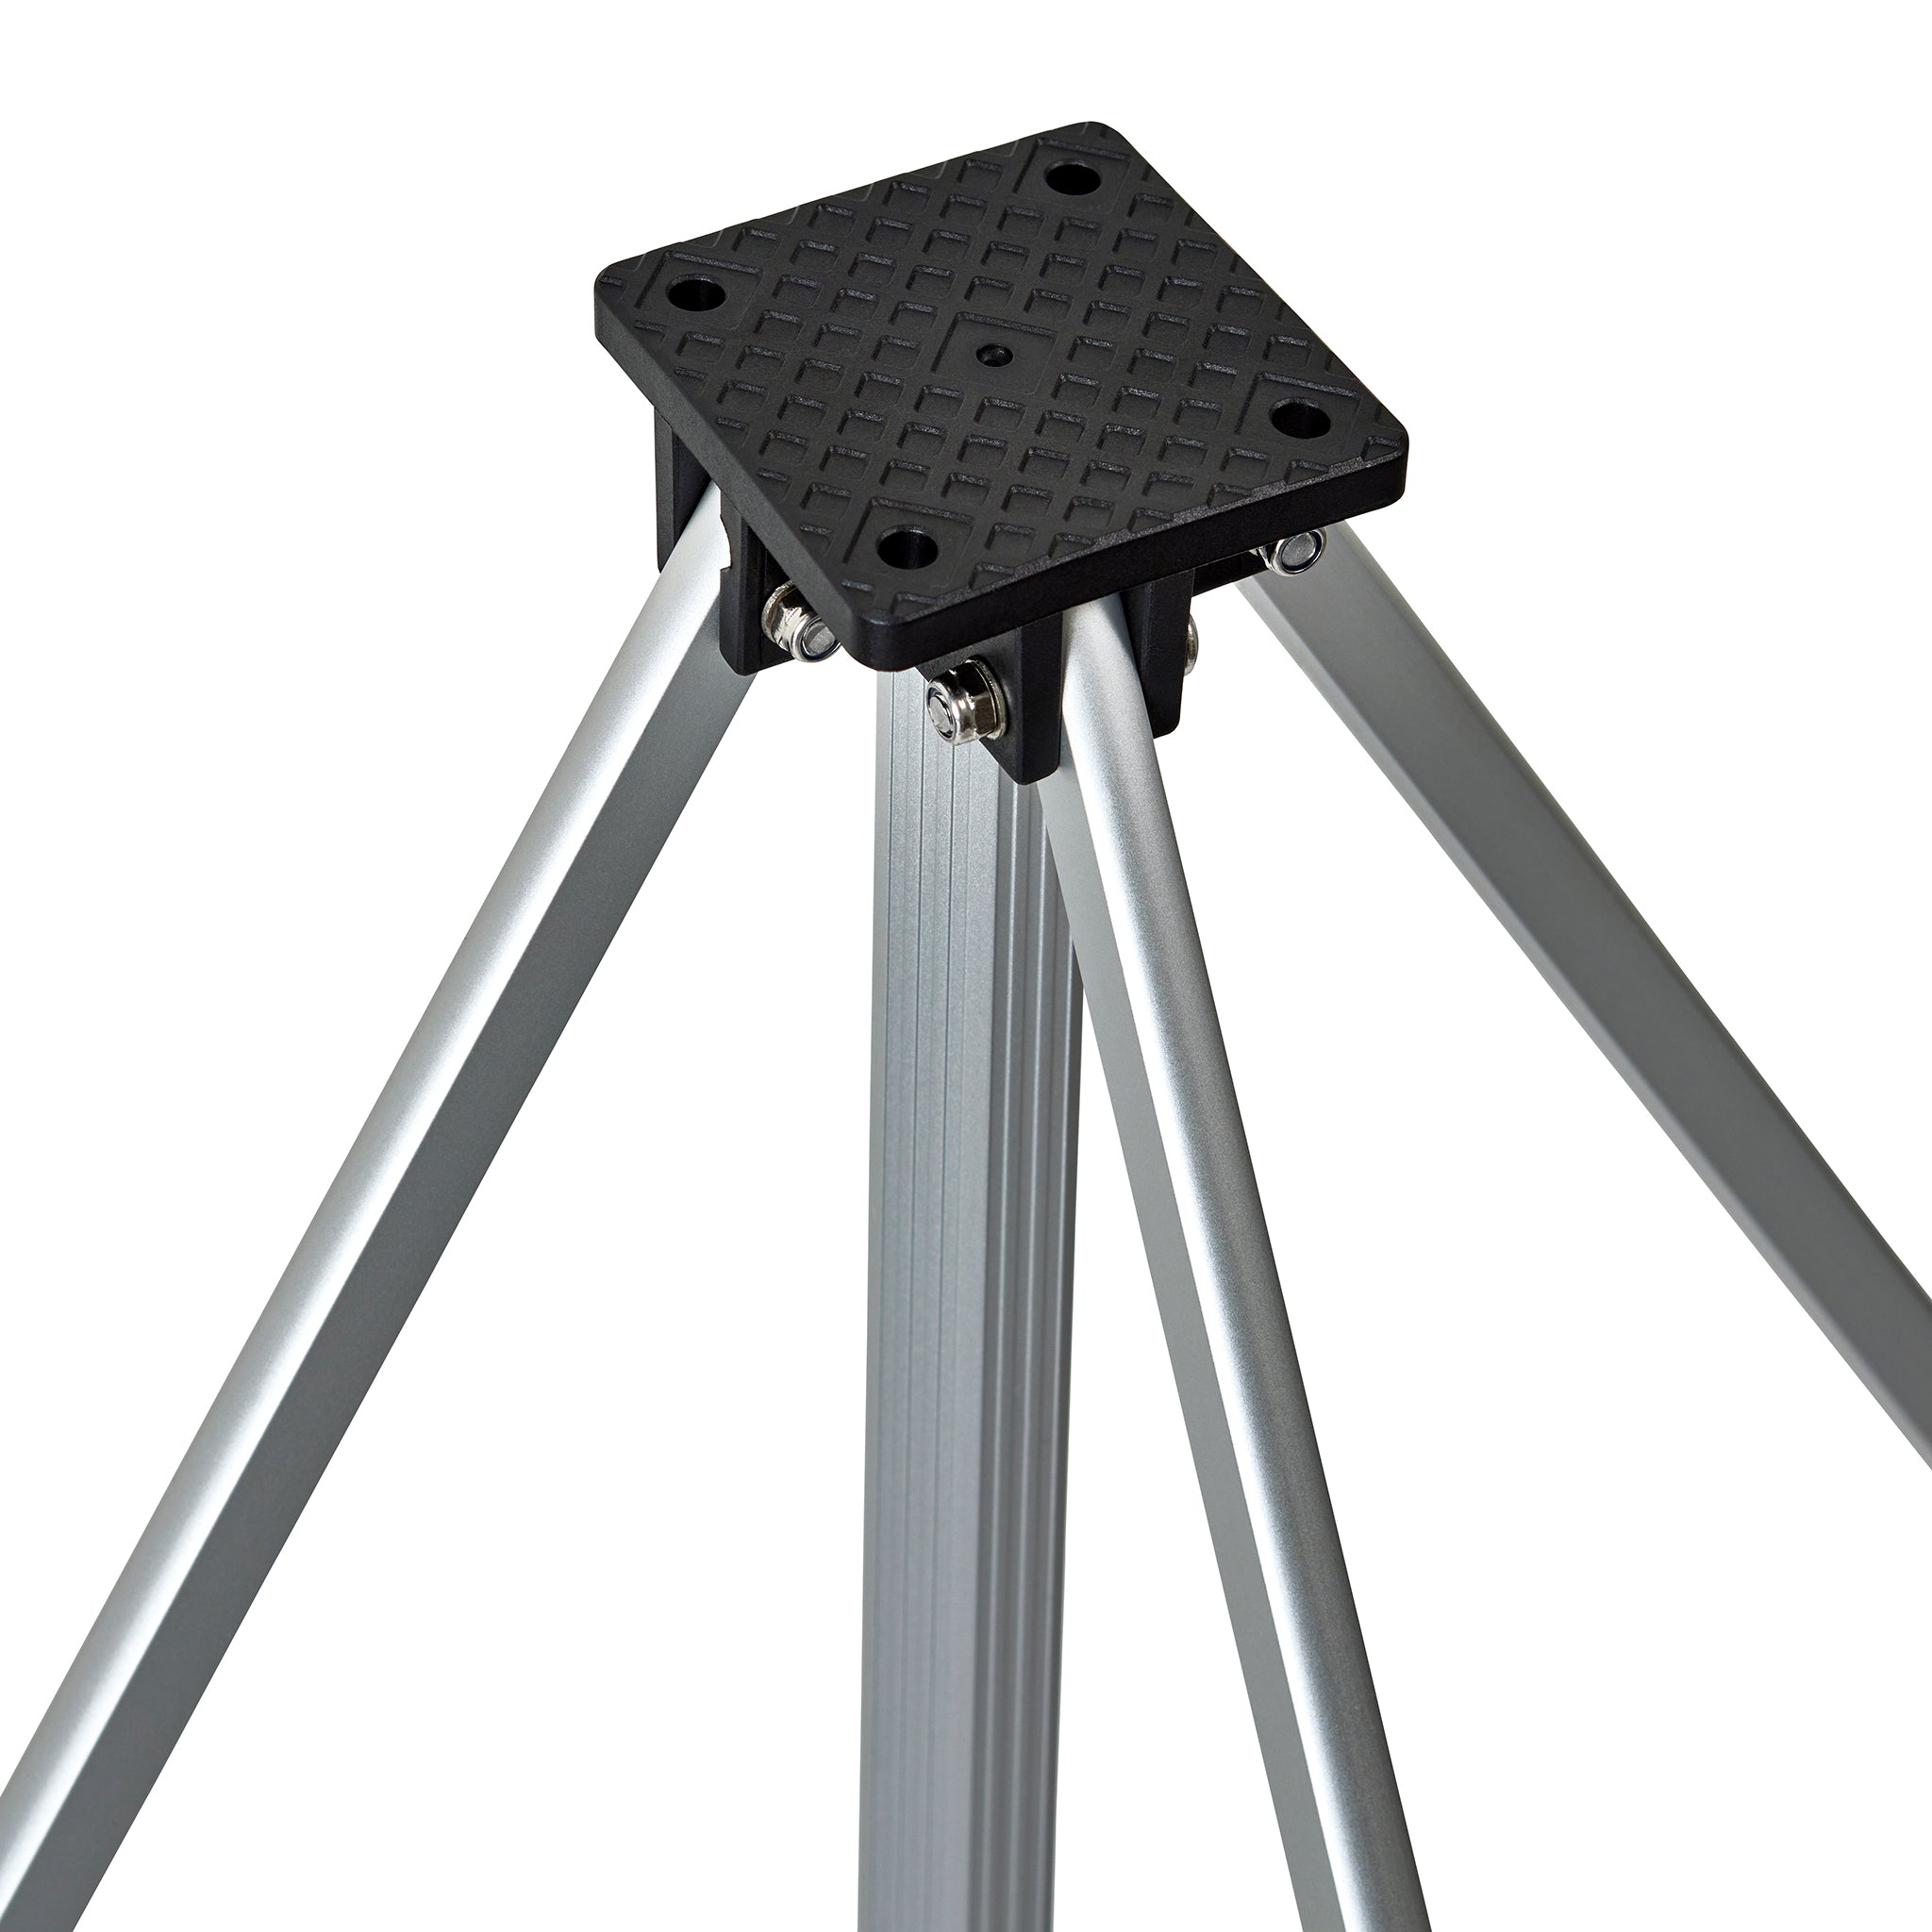 Portable Folding Workstand